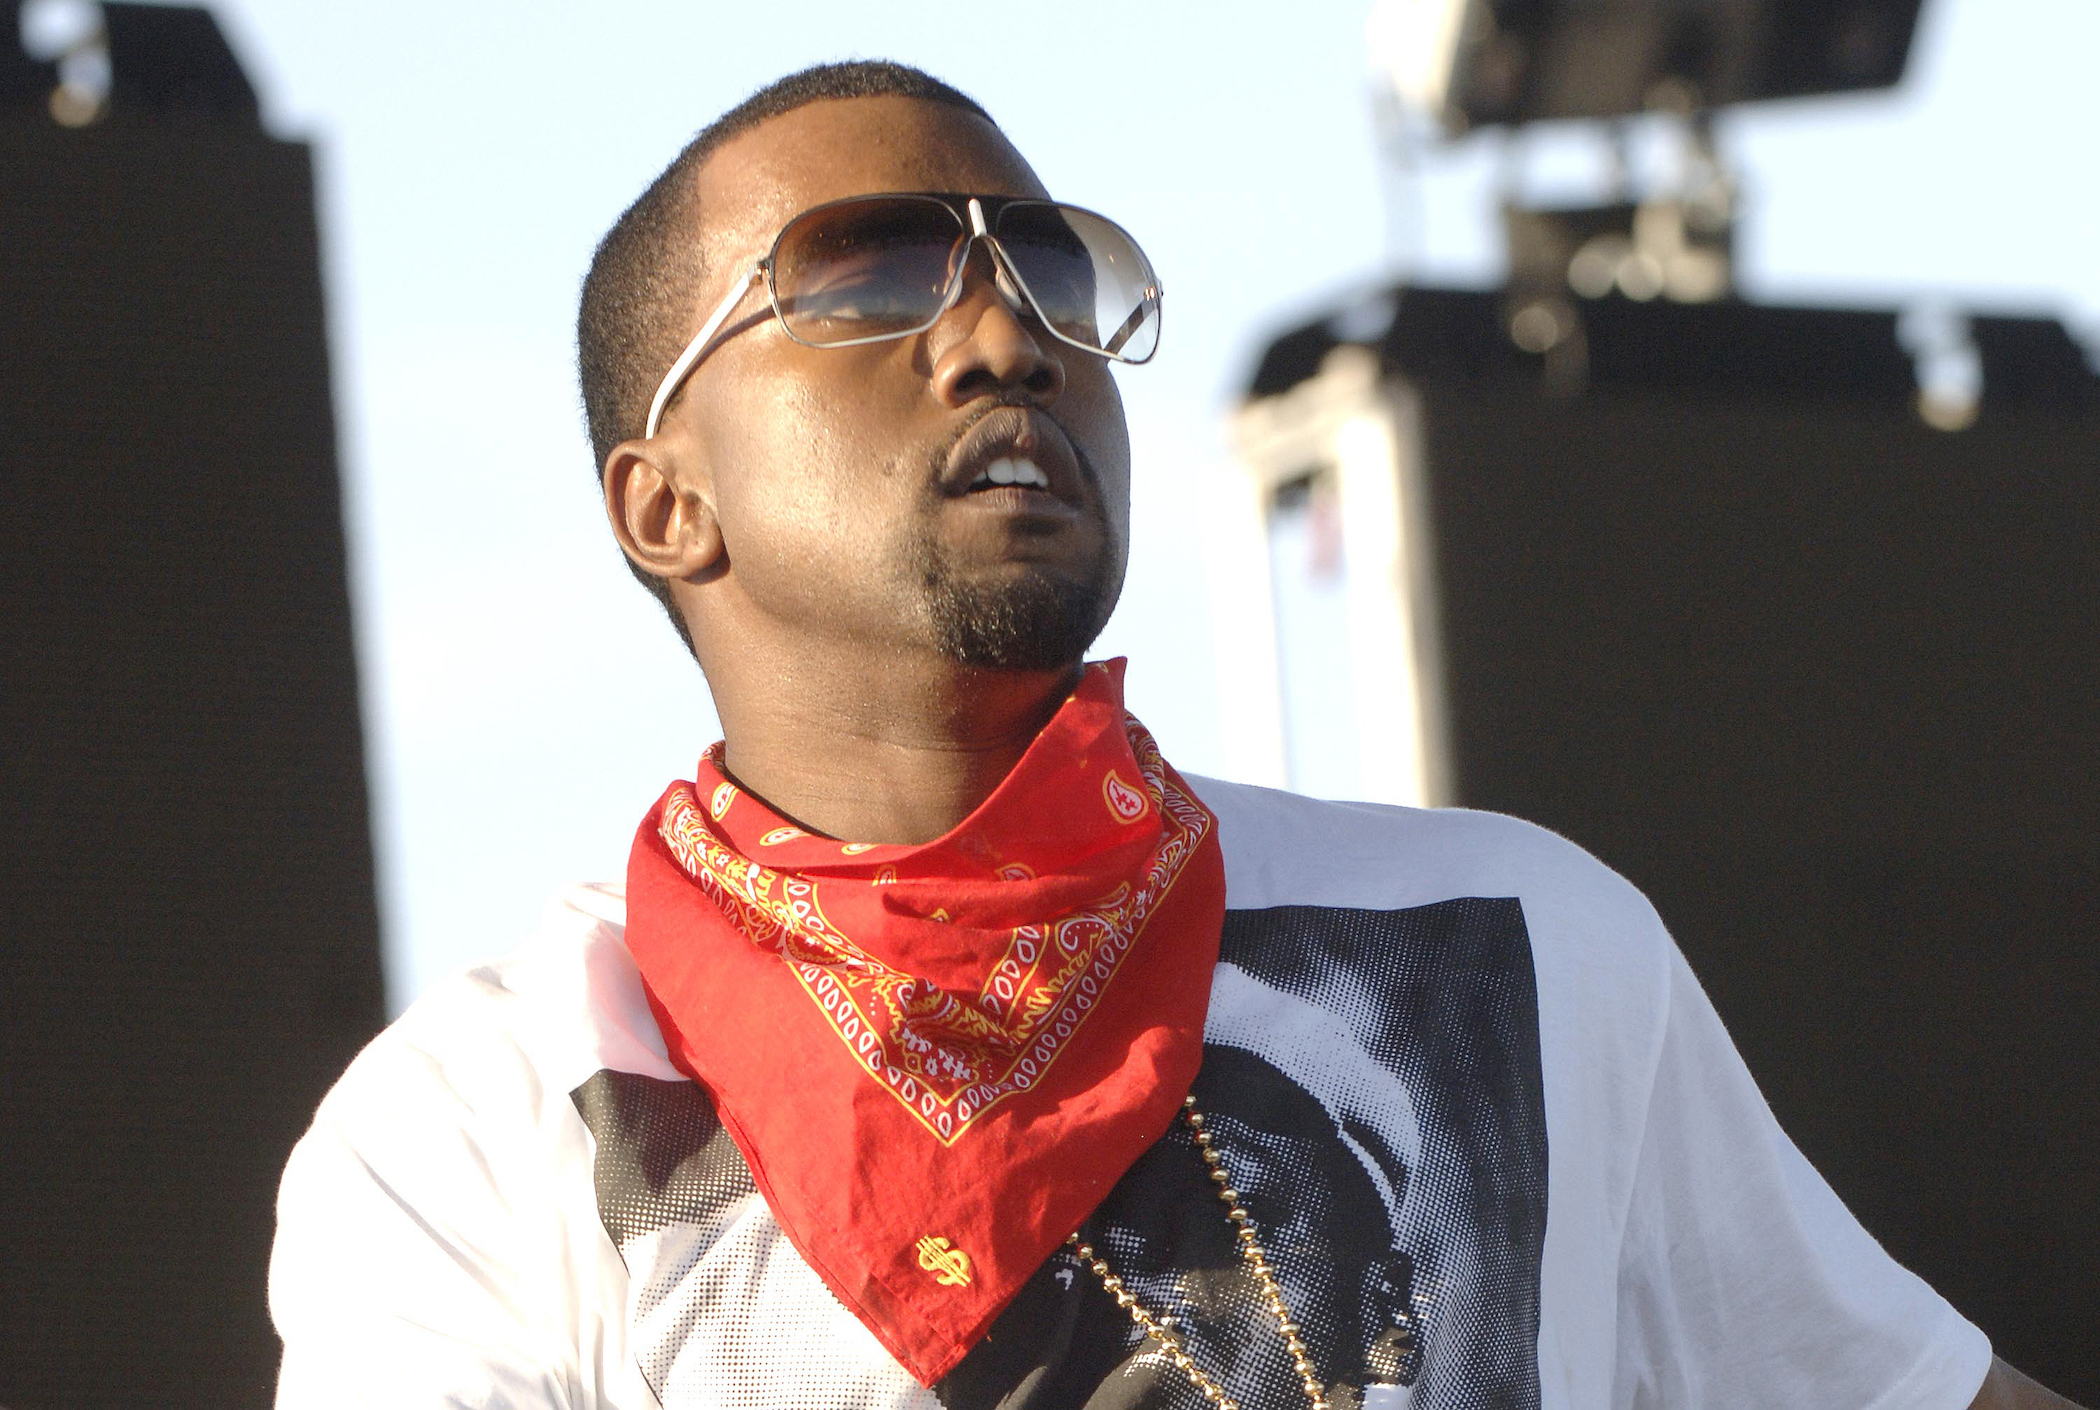 A close-up of Kanye West wearing sunglasses and a red bandana around his neck